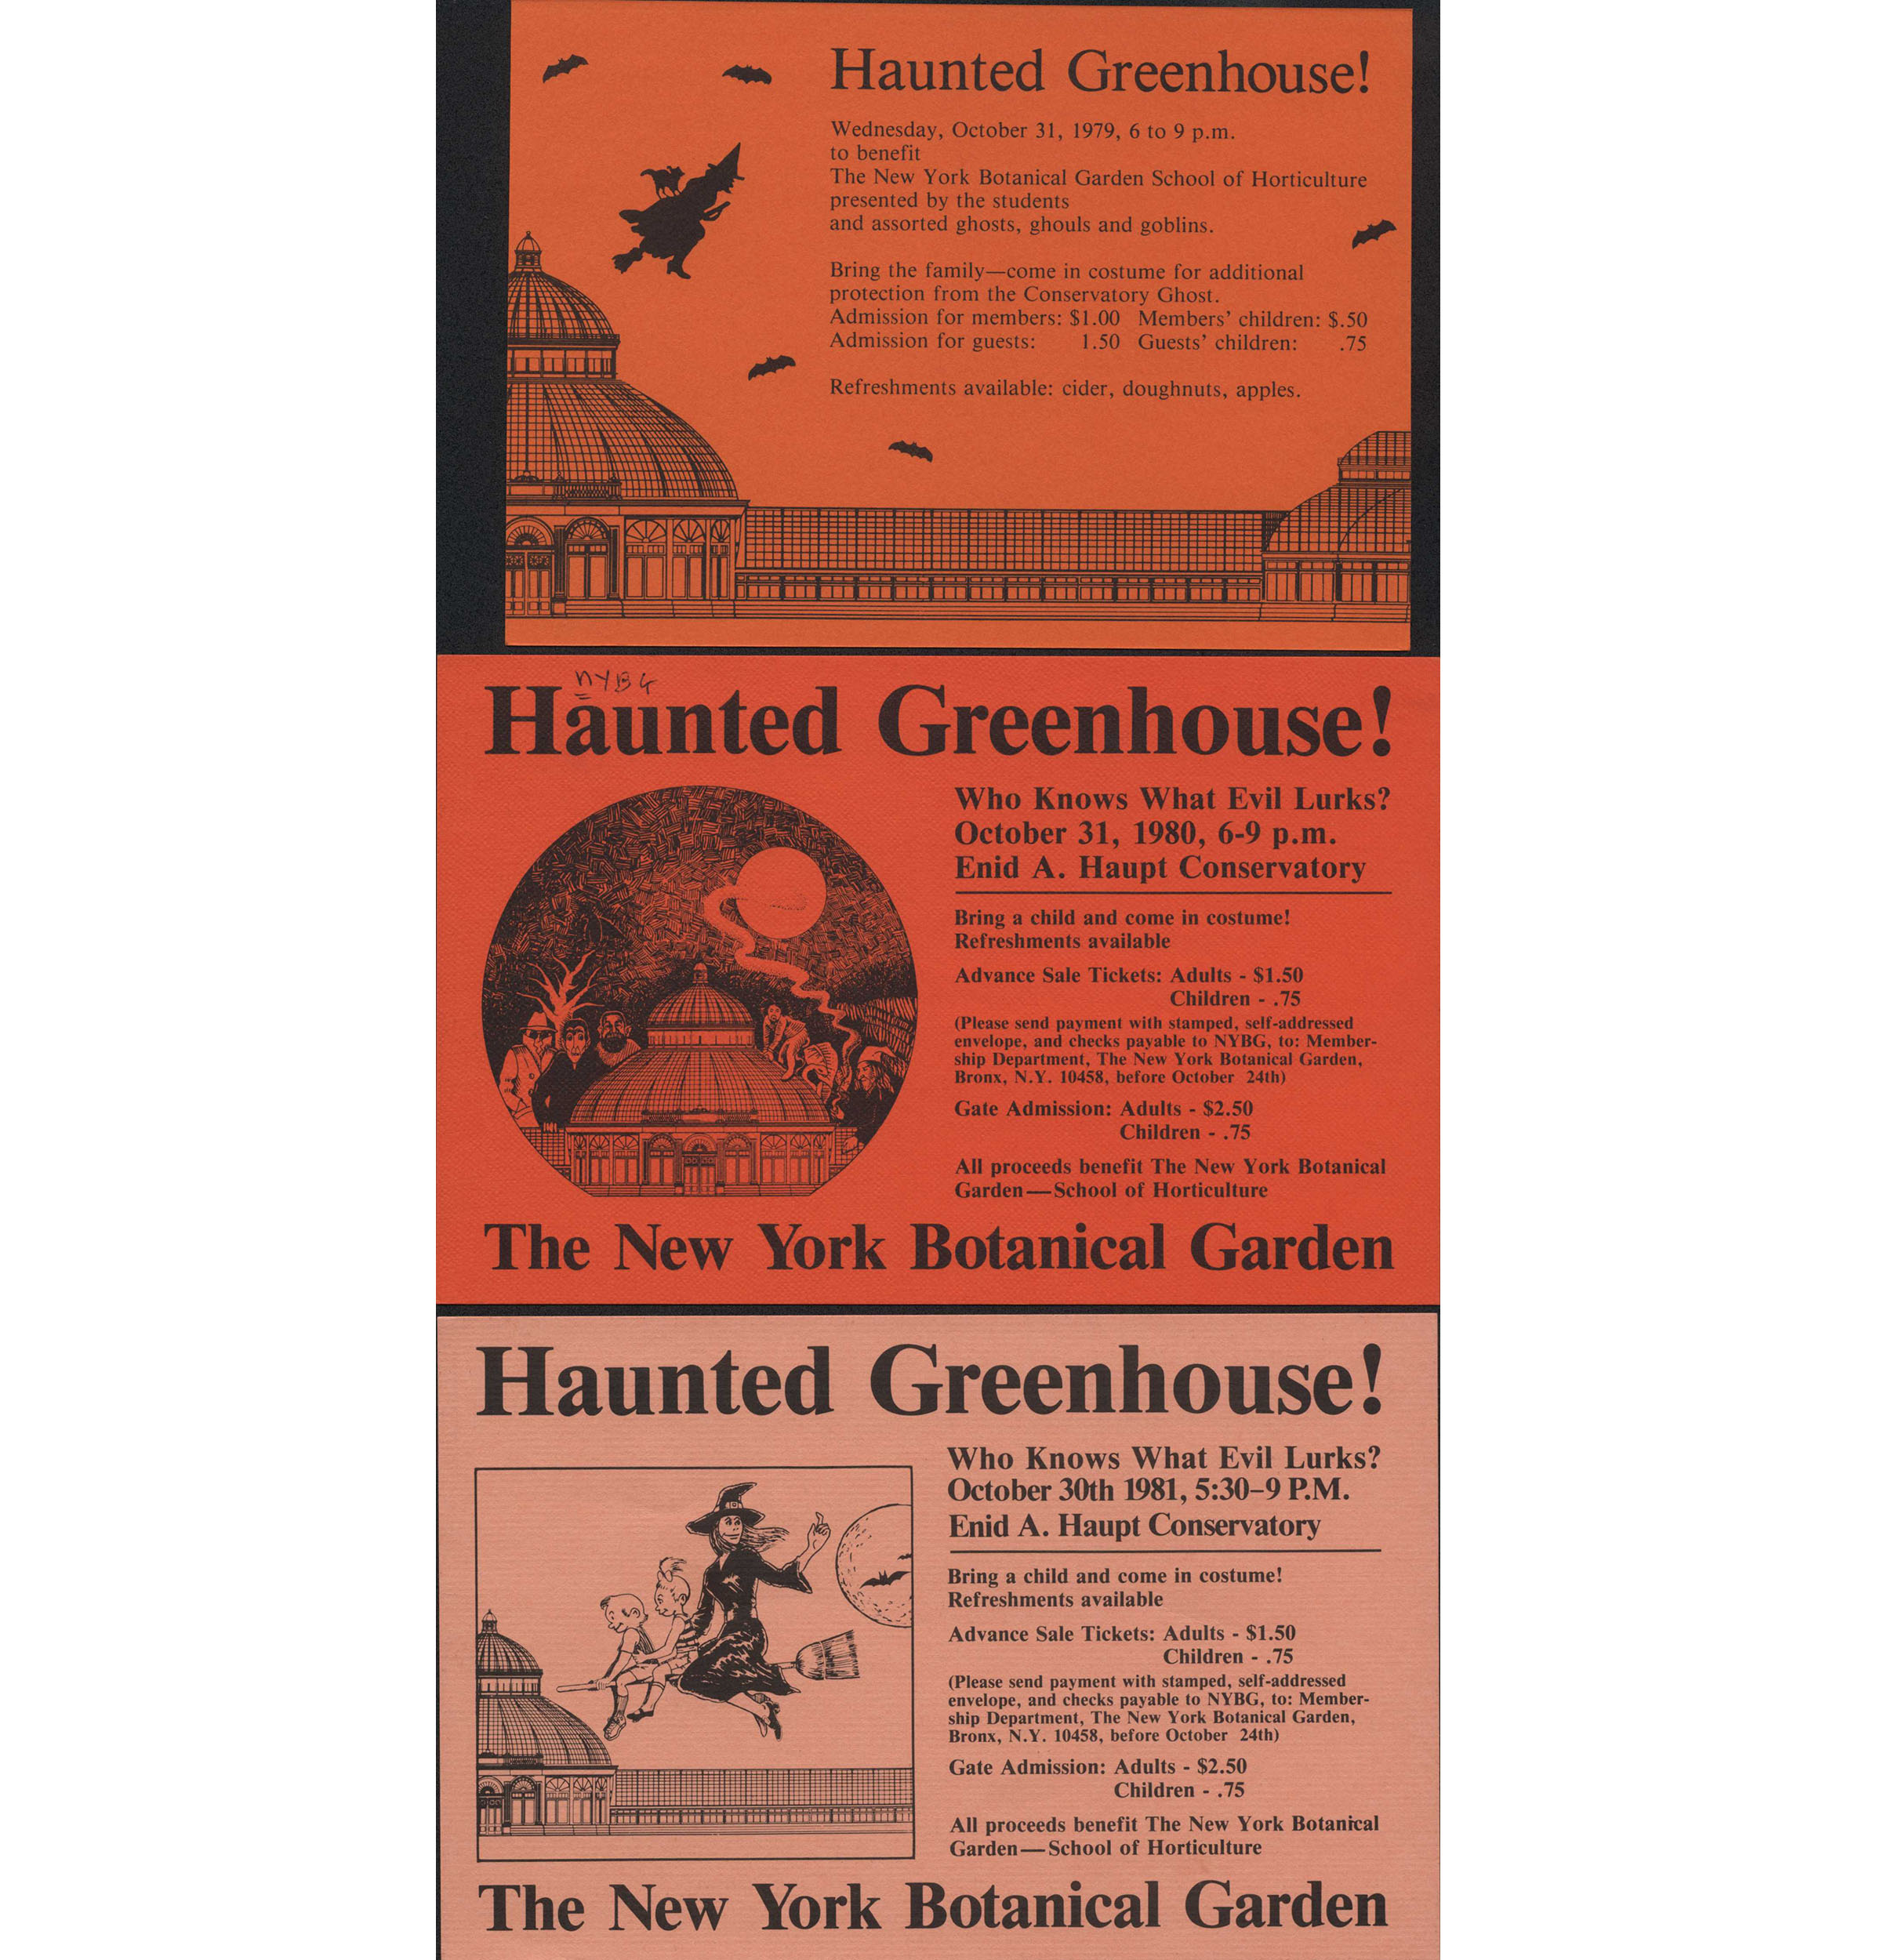 Three tickets from 1980 for entry into the Haunted Greenhouse. Each ticket is a different shade of orange with an image that depicts the Conservatory and spooky imagery.